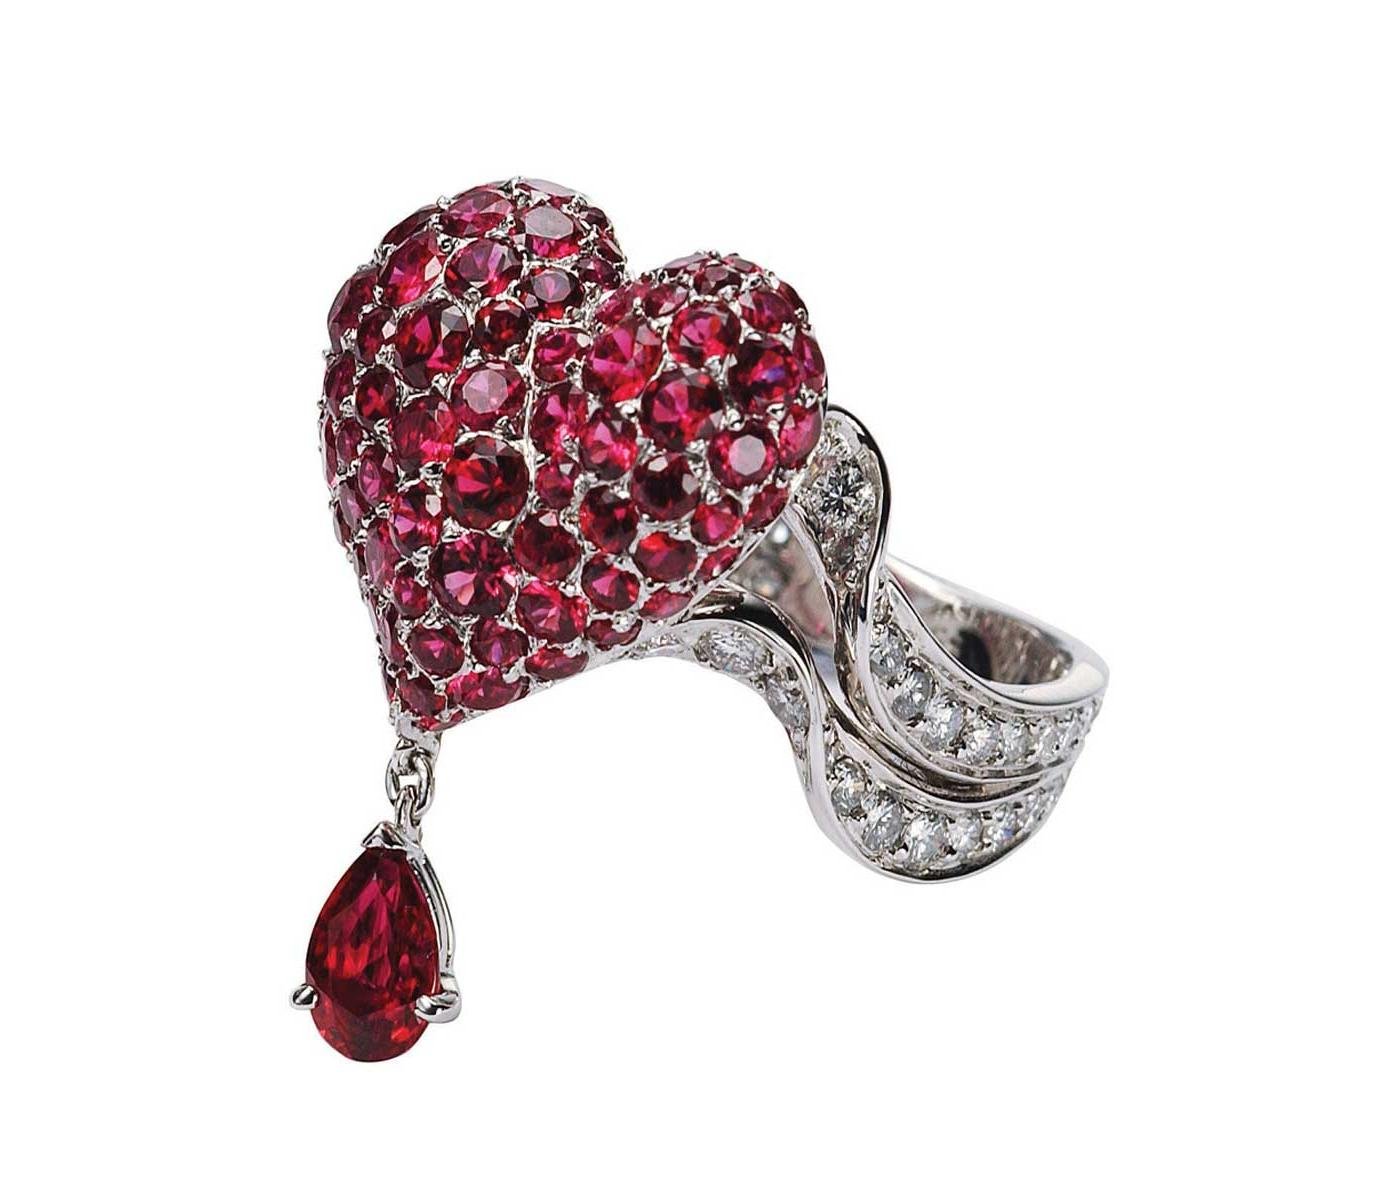 Ring by Dior Joaillerie